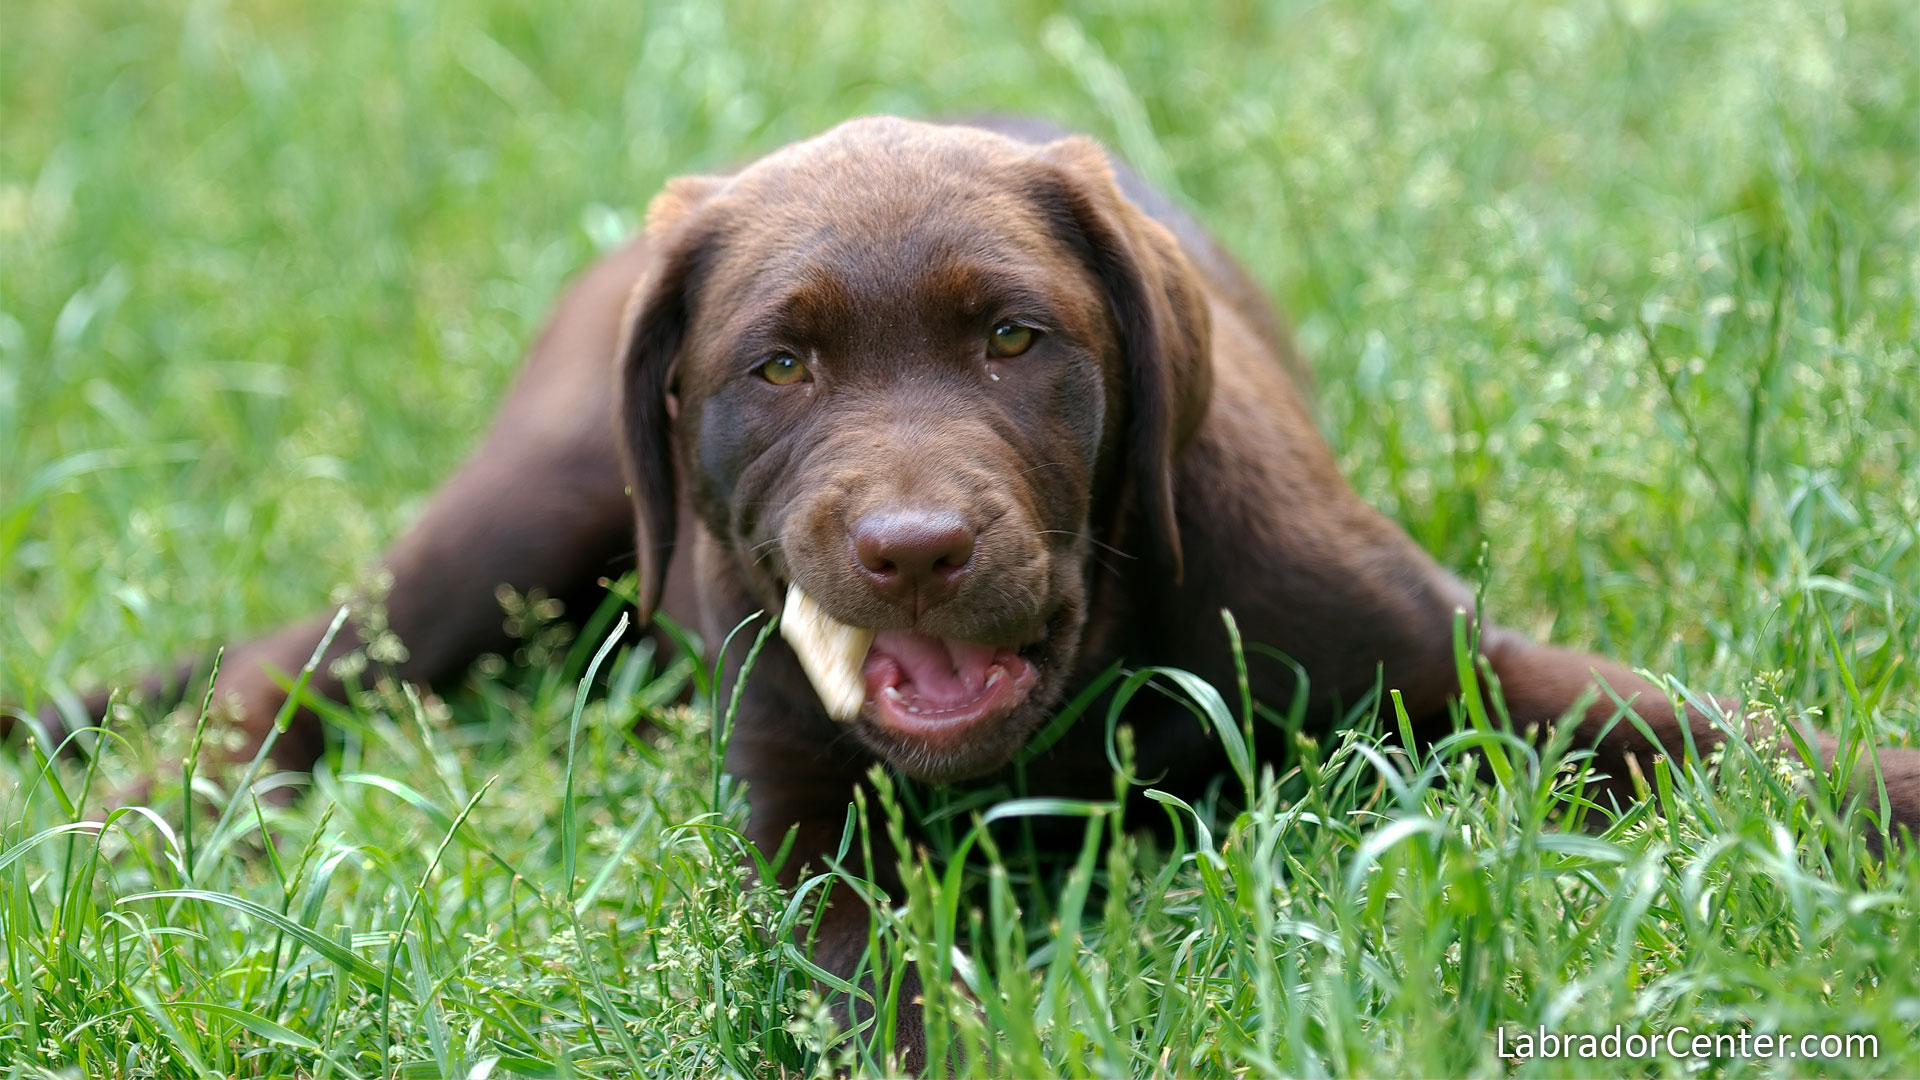 Chocolate(Brown) Labrador Pup in the Grass